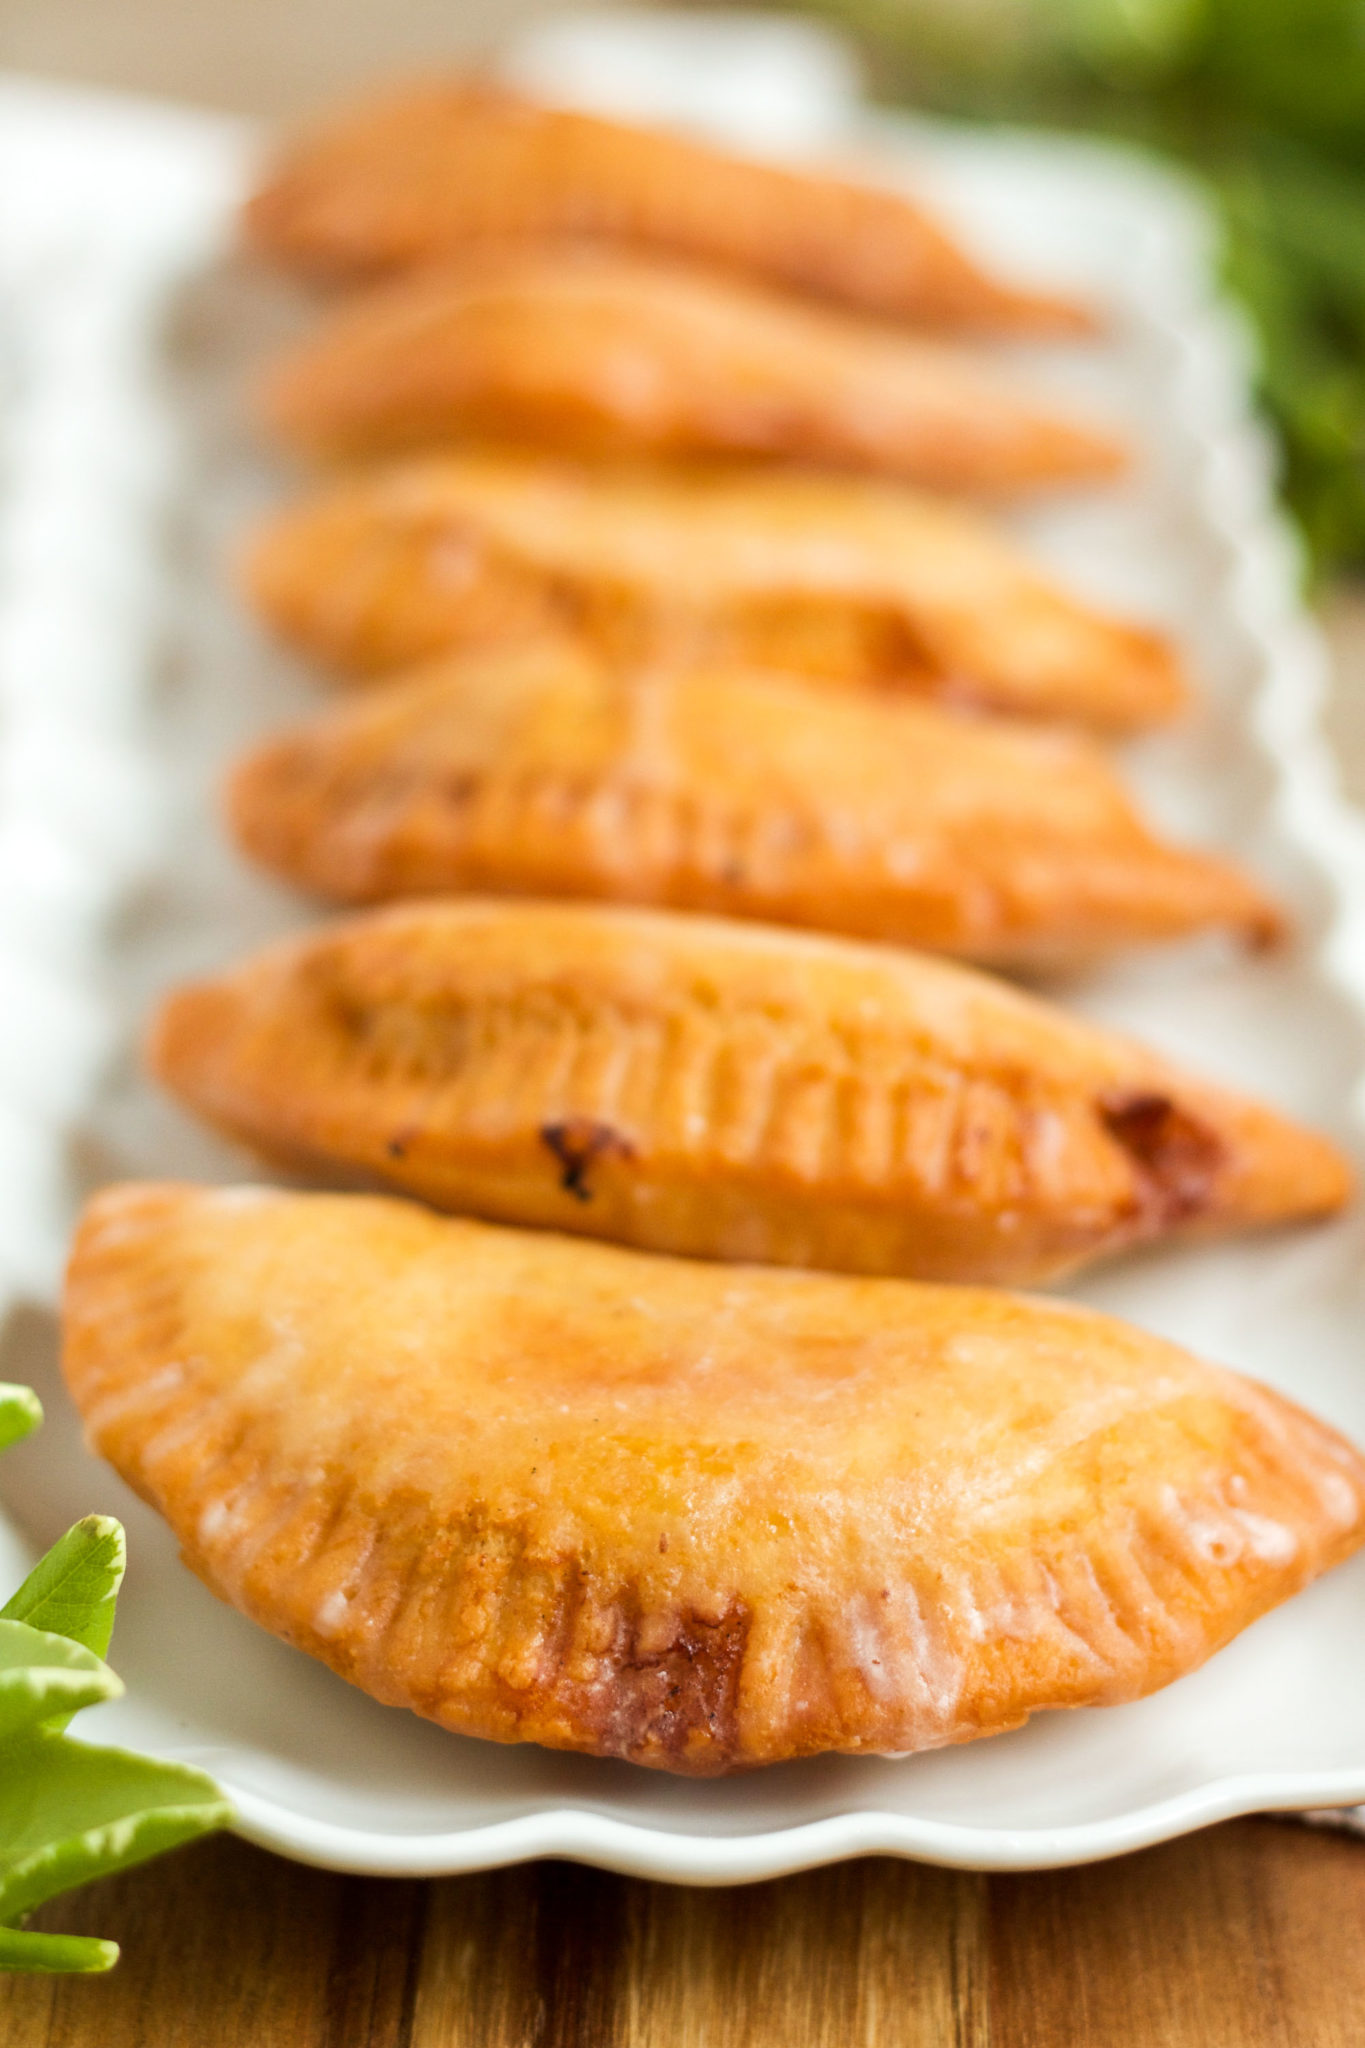 These delicious fried hand pies are filled with homemade peach jam, and are topped with a sweet, sugary glaze!